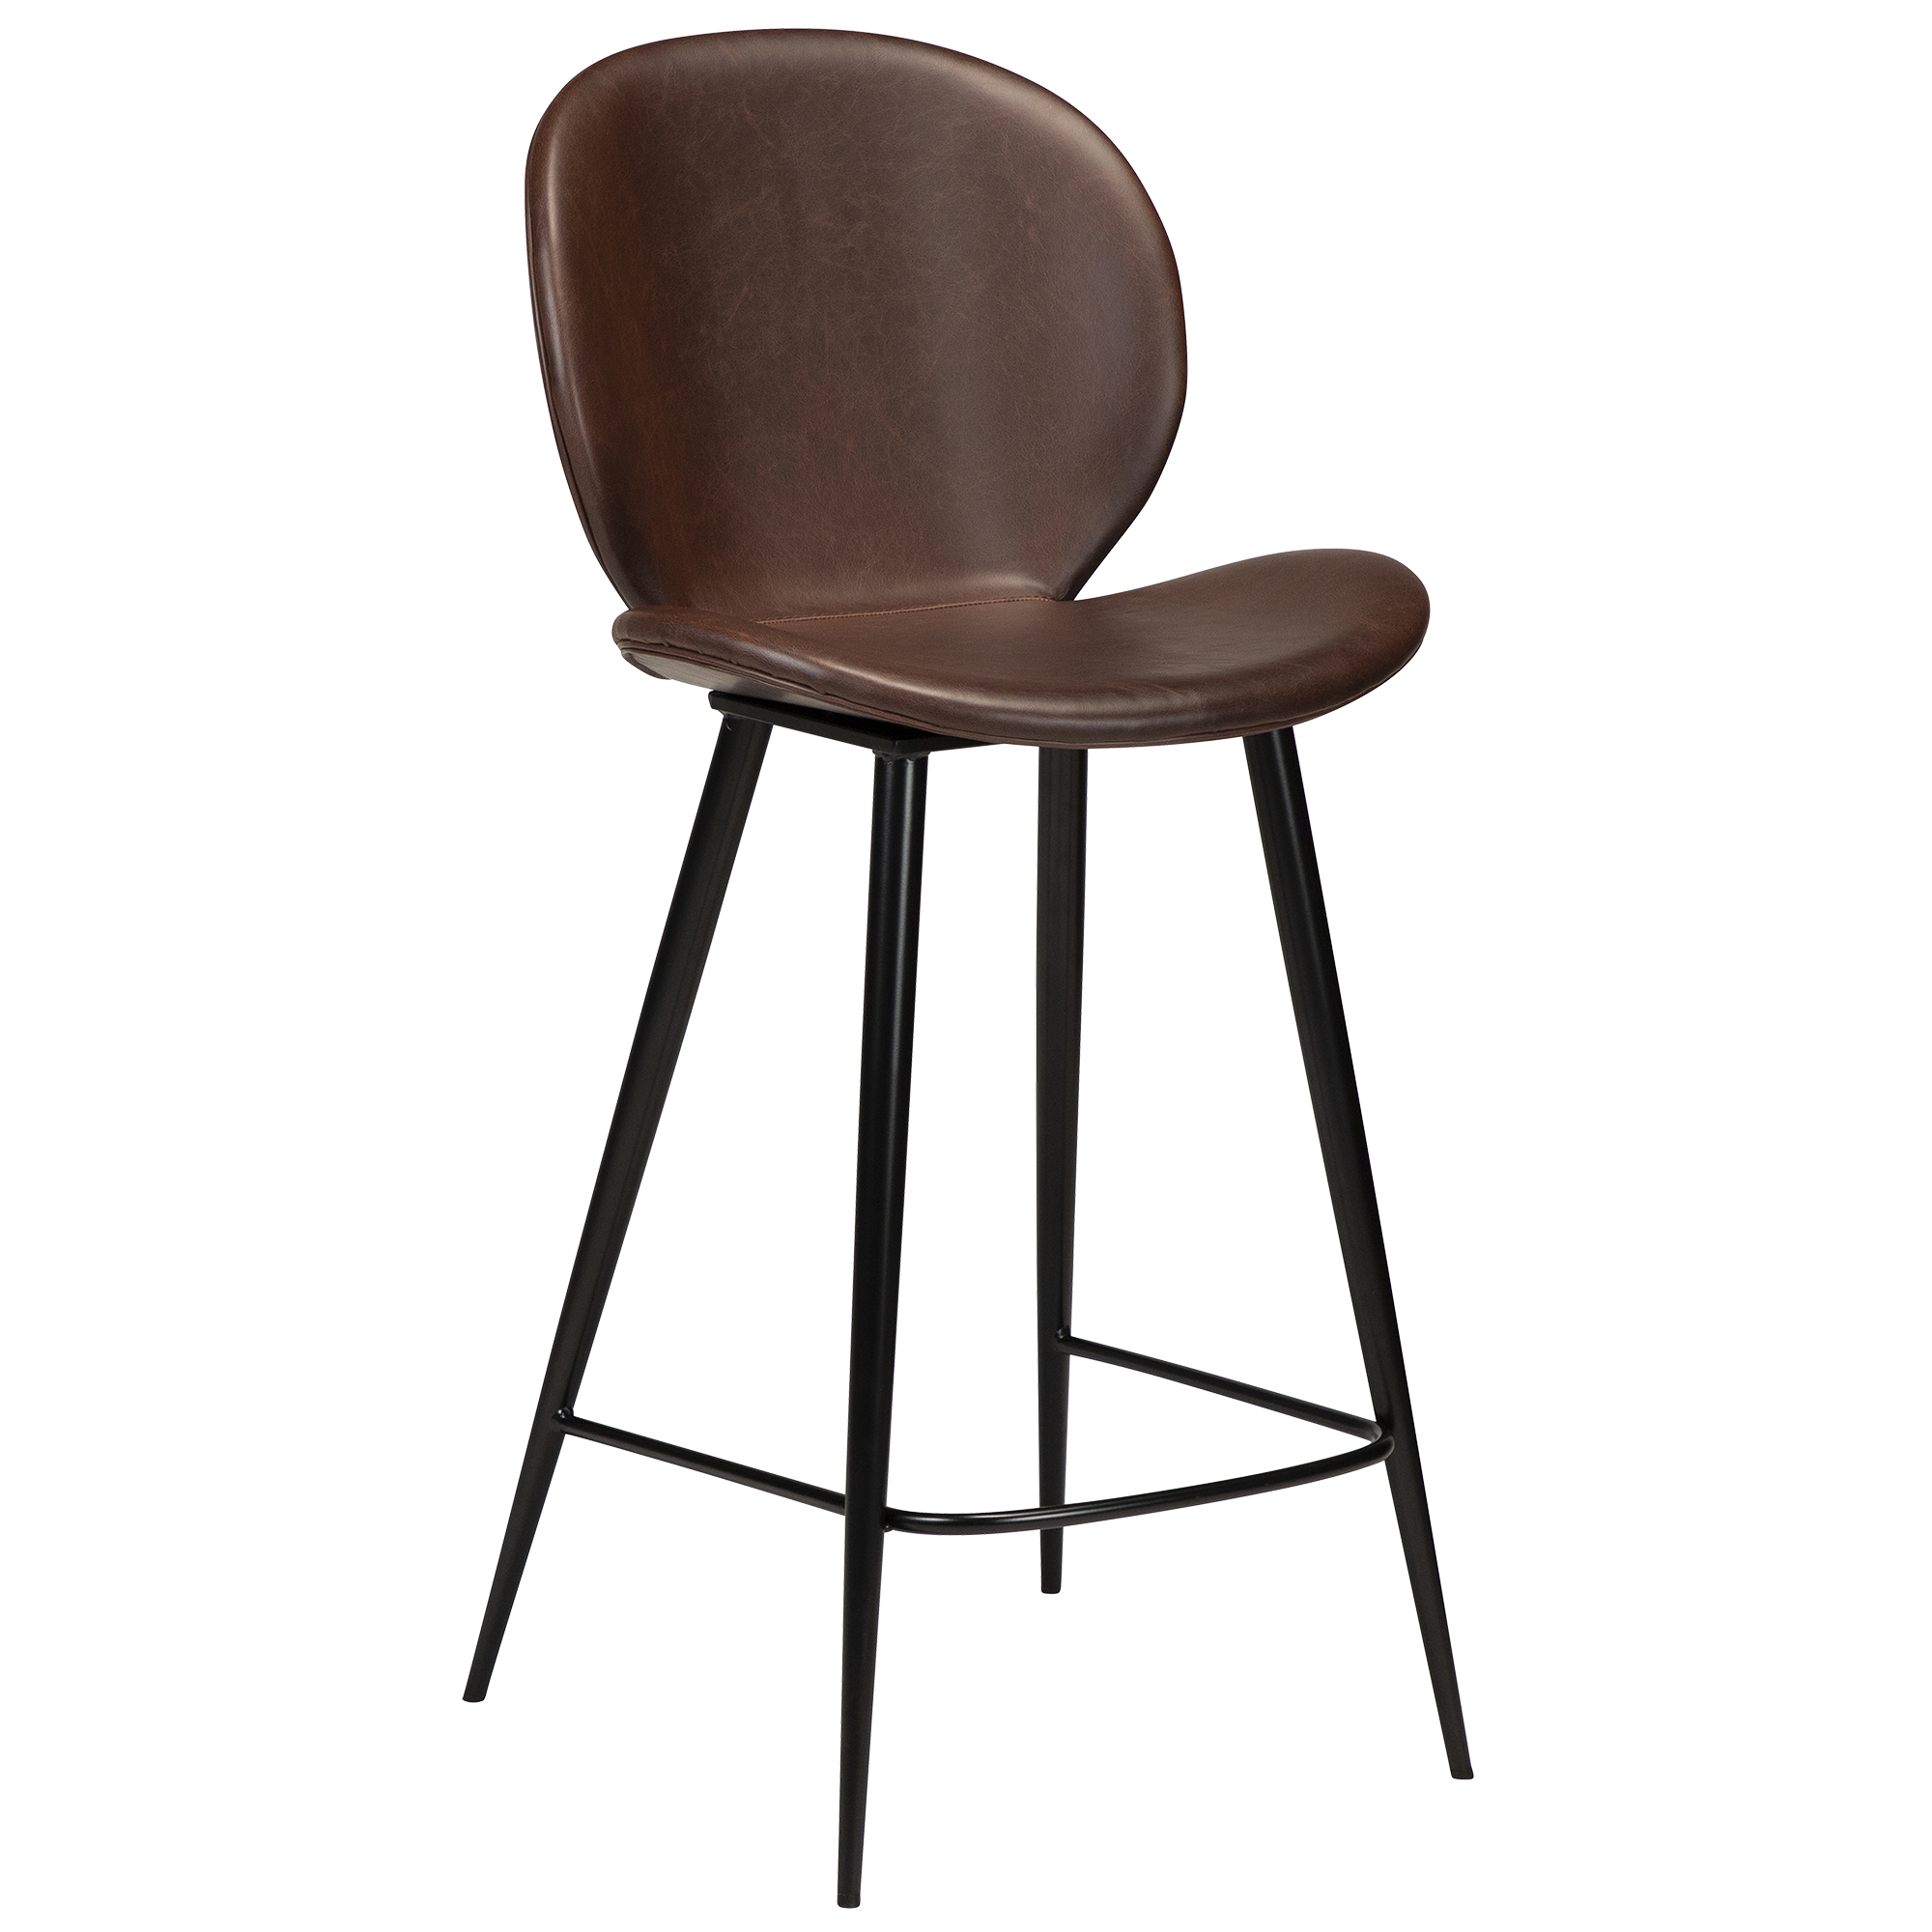 Cloud Counter Stool Vintage Cocoa Art Leather With Black Metal Legs 300800230 01 Main